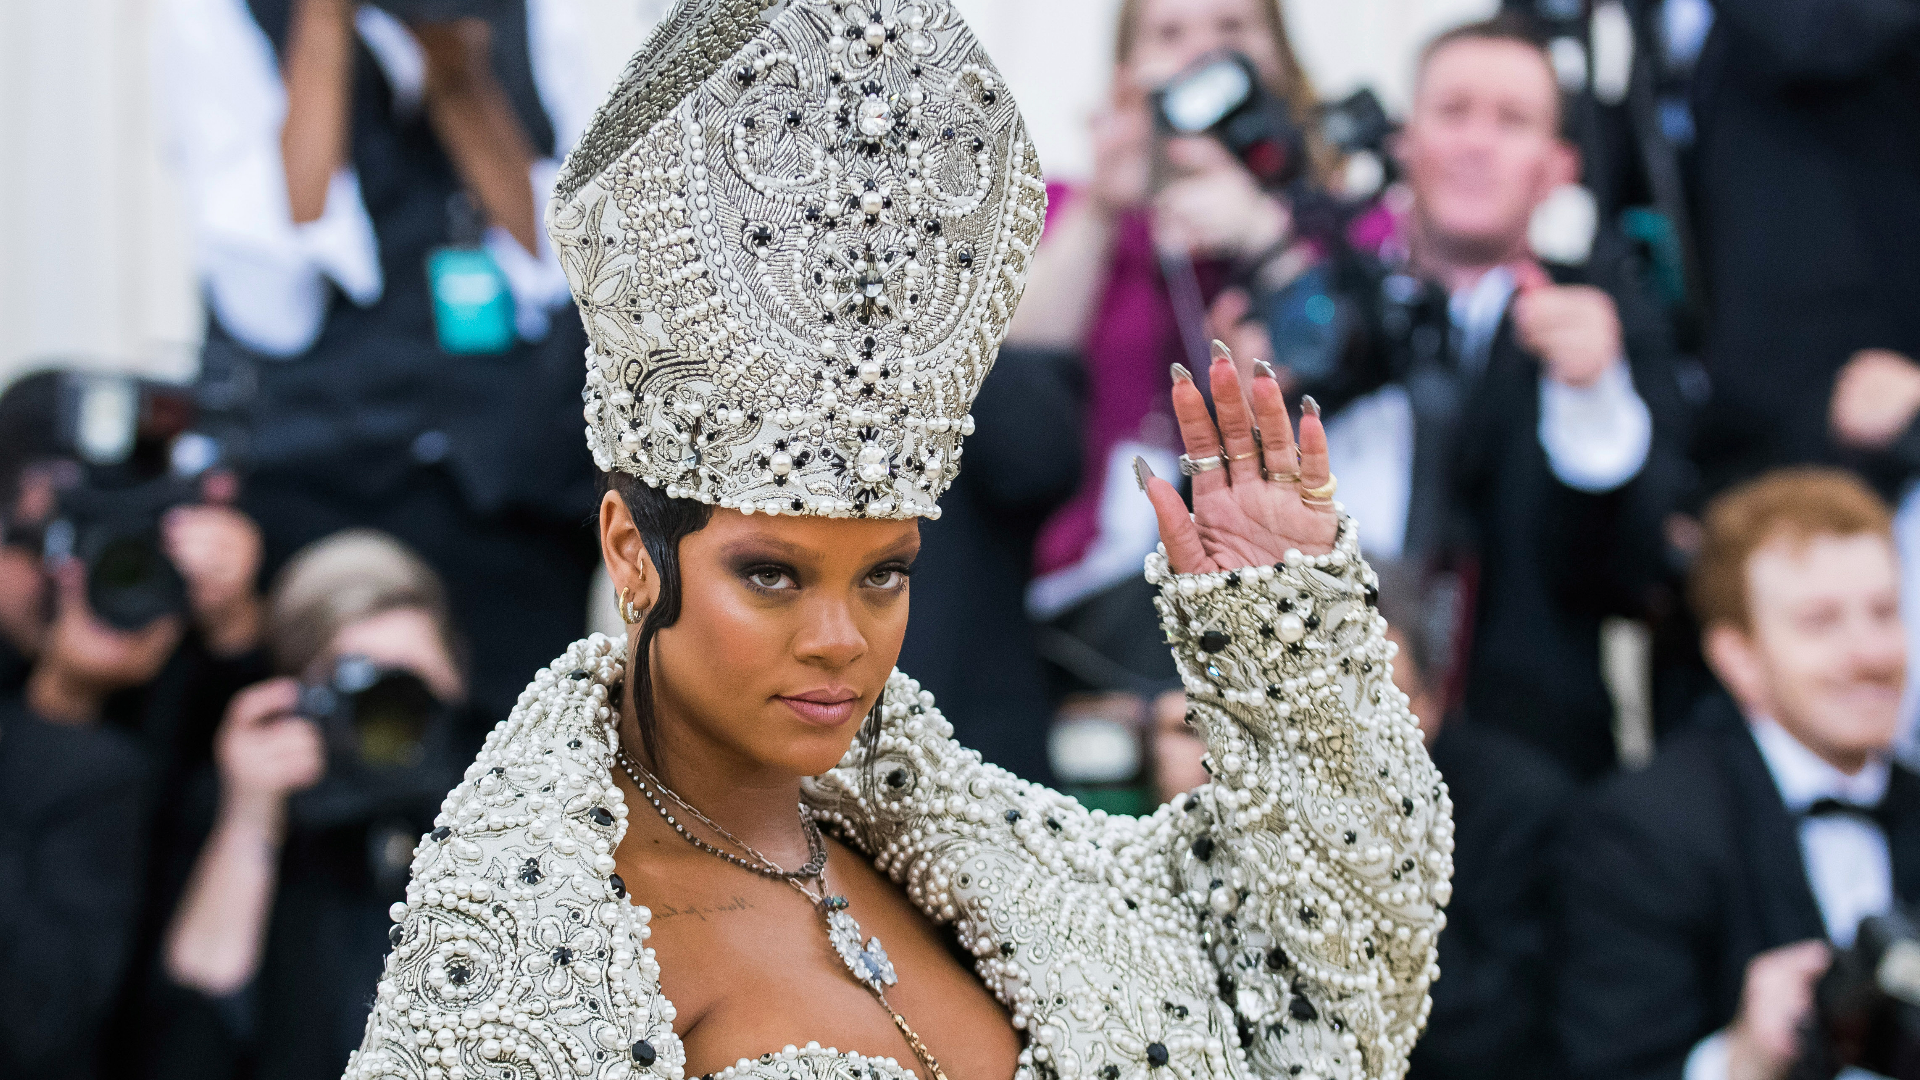 Rihanna coyly announced the news first, sharing a photo of her hand holding up a football.